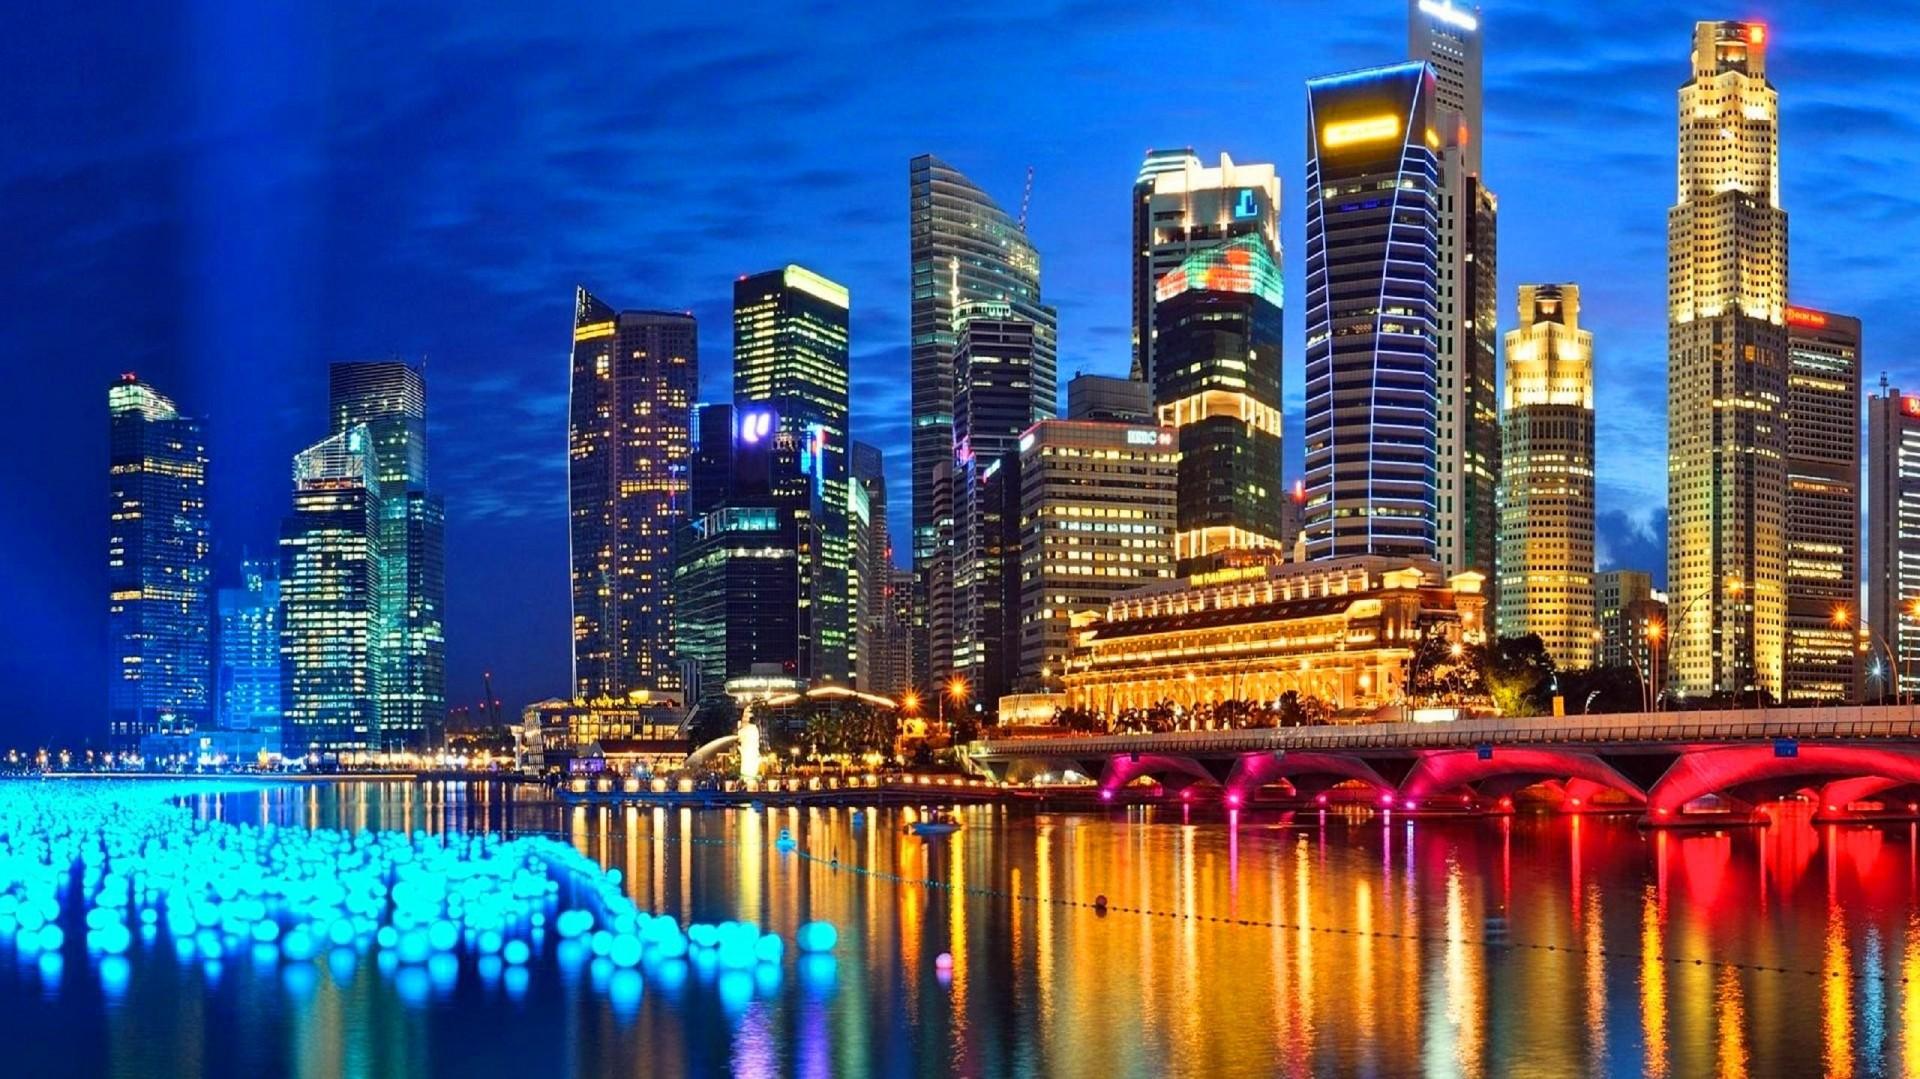 Free download Free 4K Singapore Wallpaper Images For Download